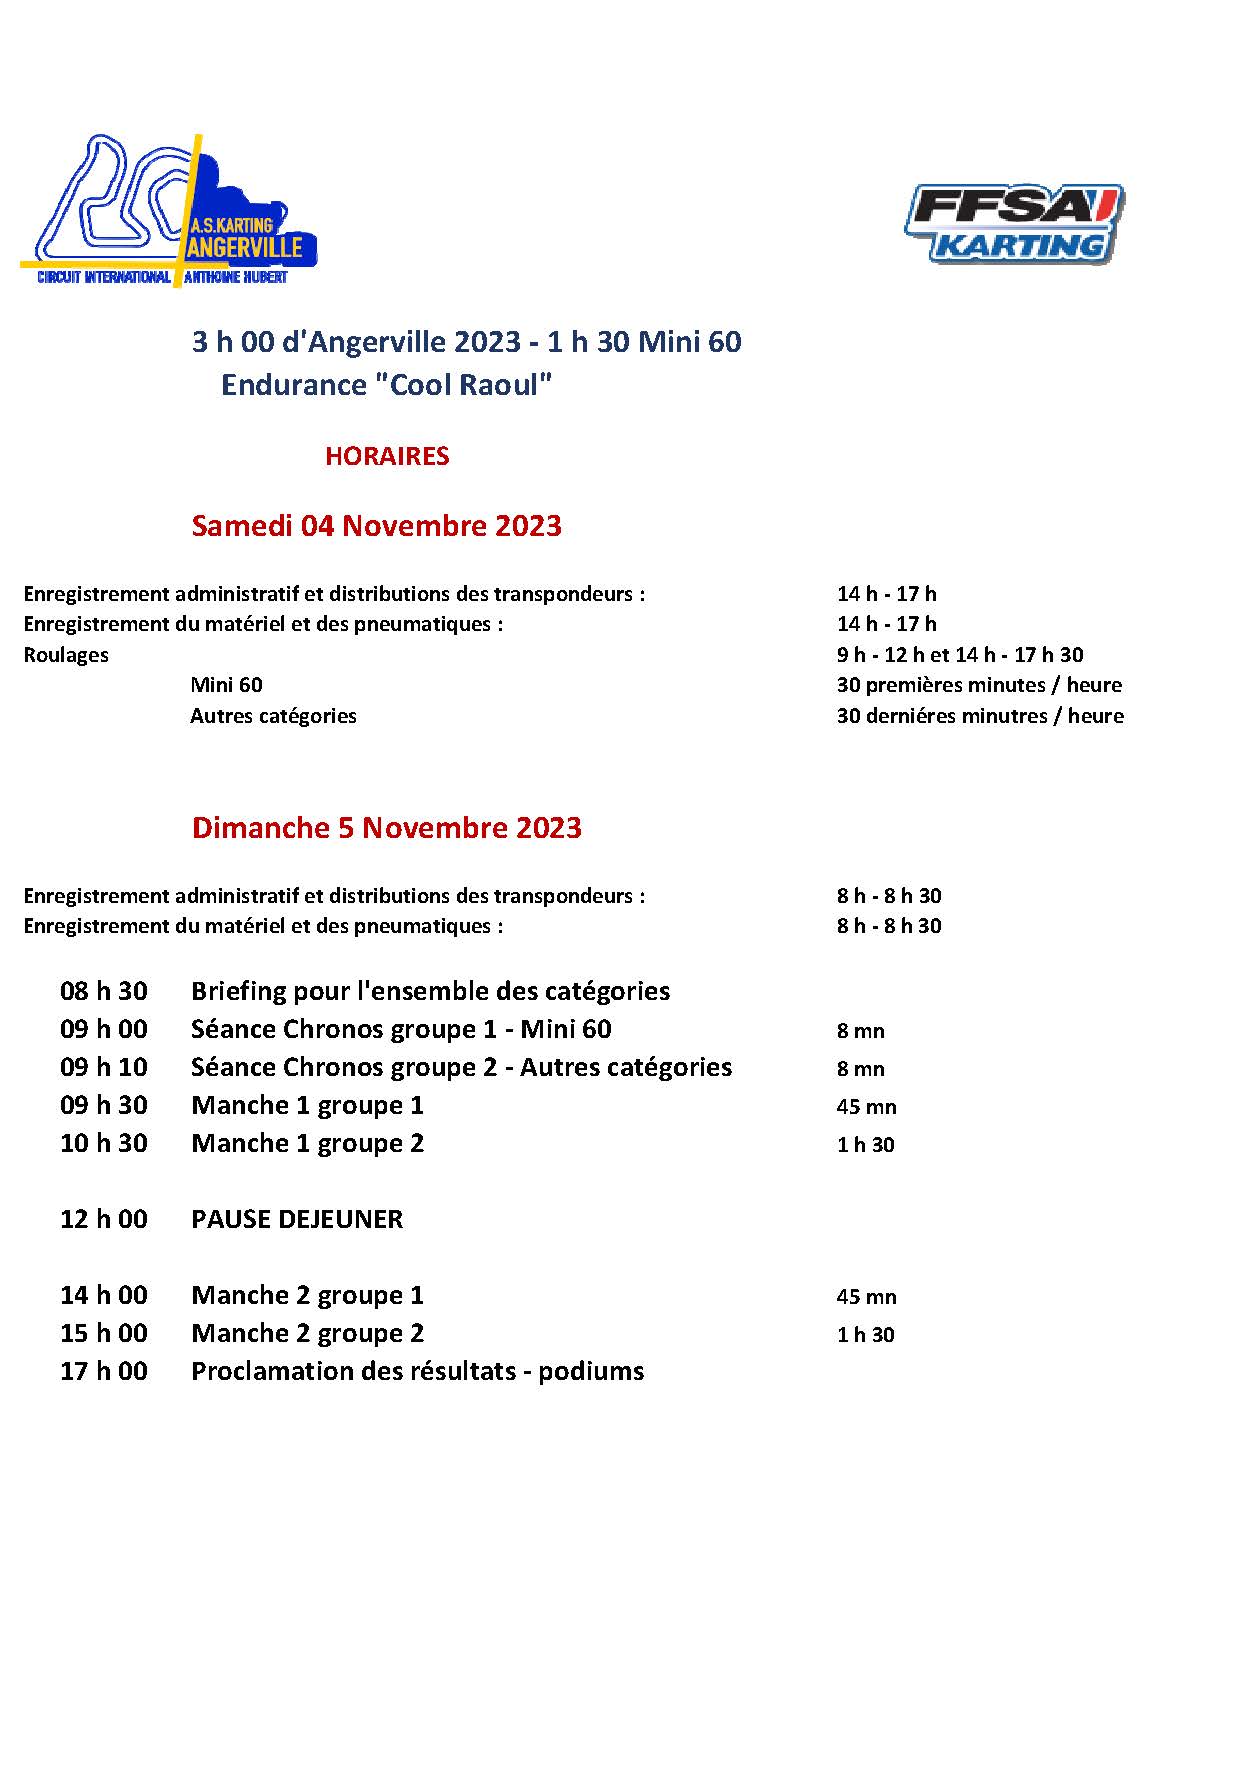 Horaires Endurance Cool Raoul 2023